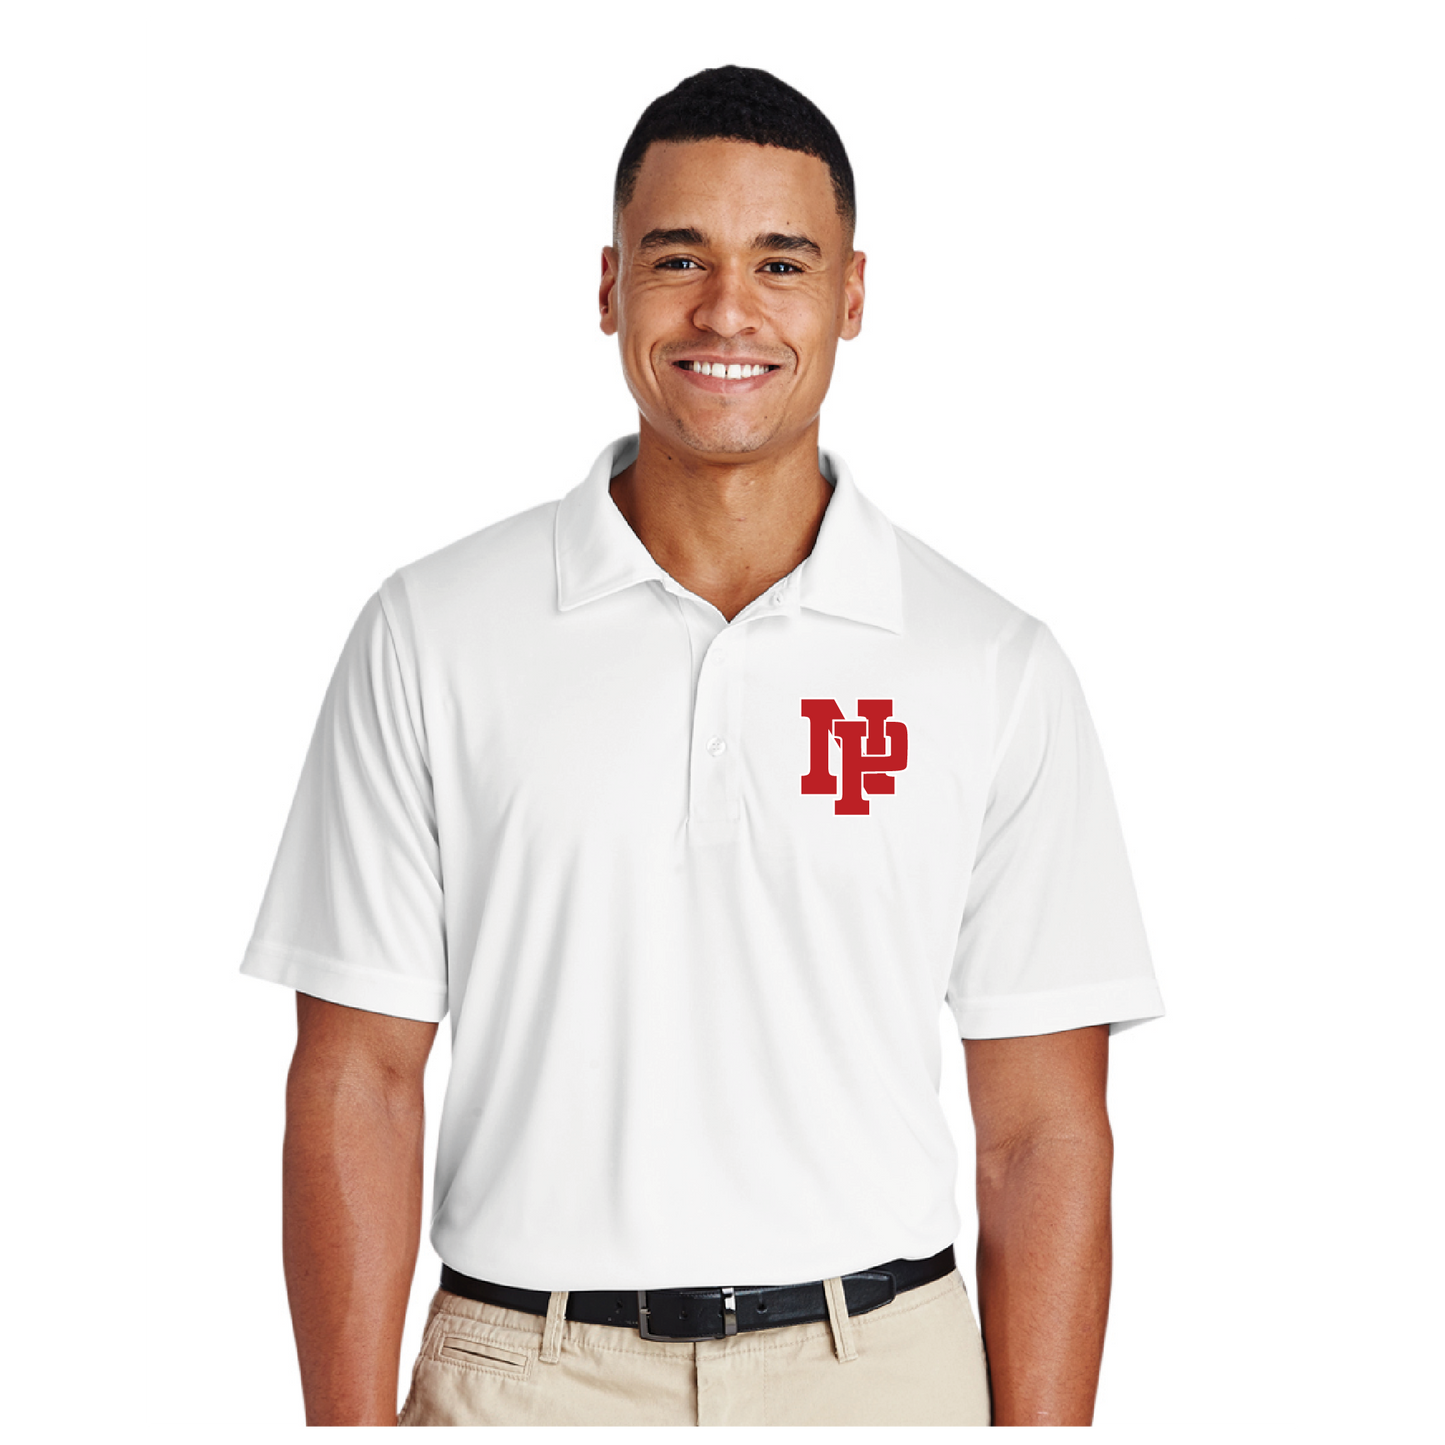 Mens Performance Polo - Red NP Logo, White Outline